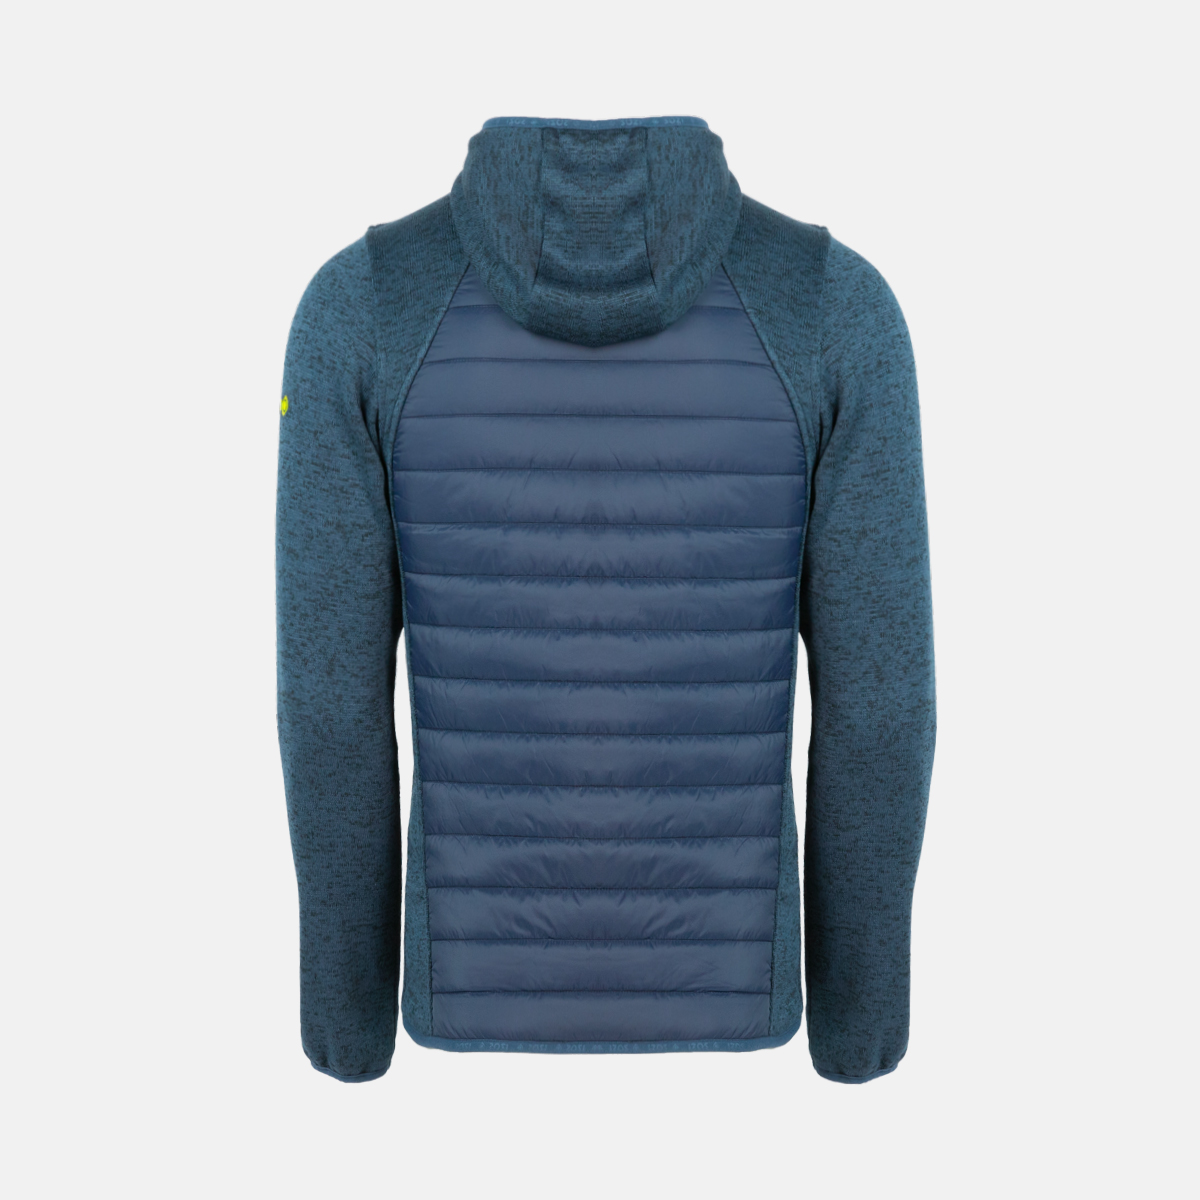  BLUE AND YELLOW KNITTED FLEECE JACKET FOR MEN NOYA M